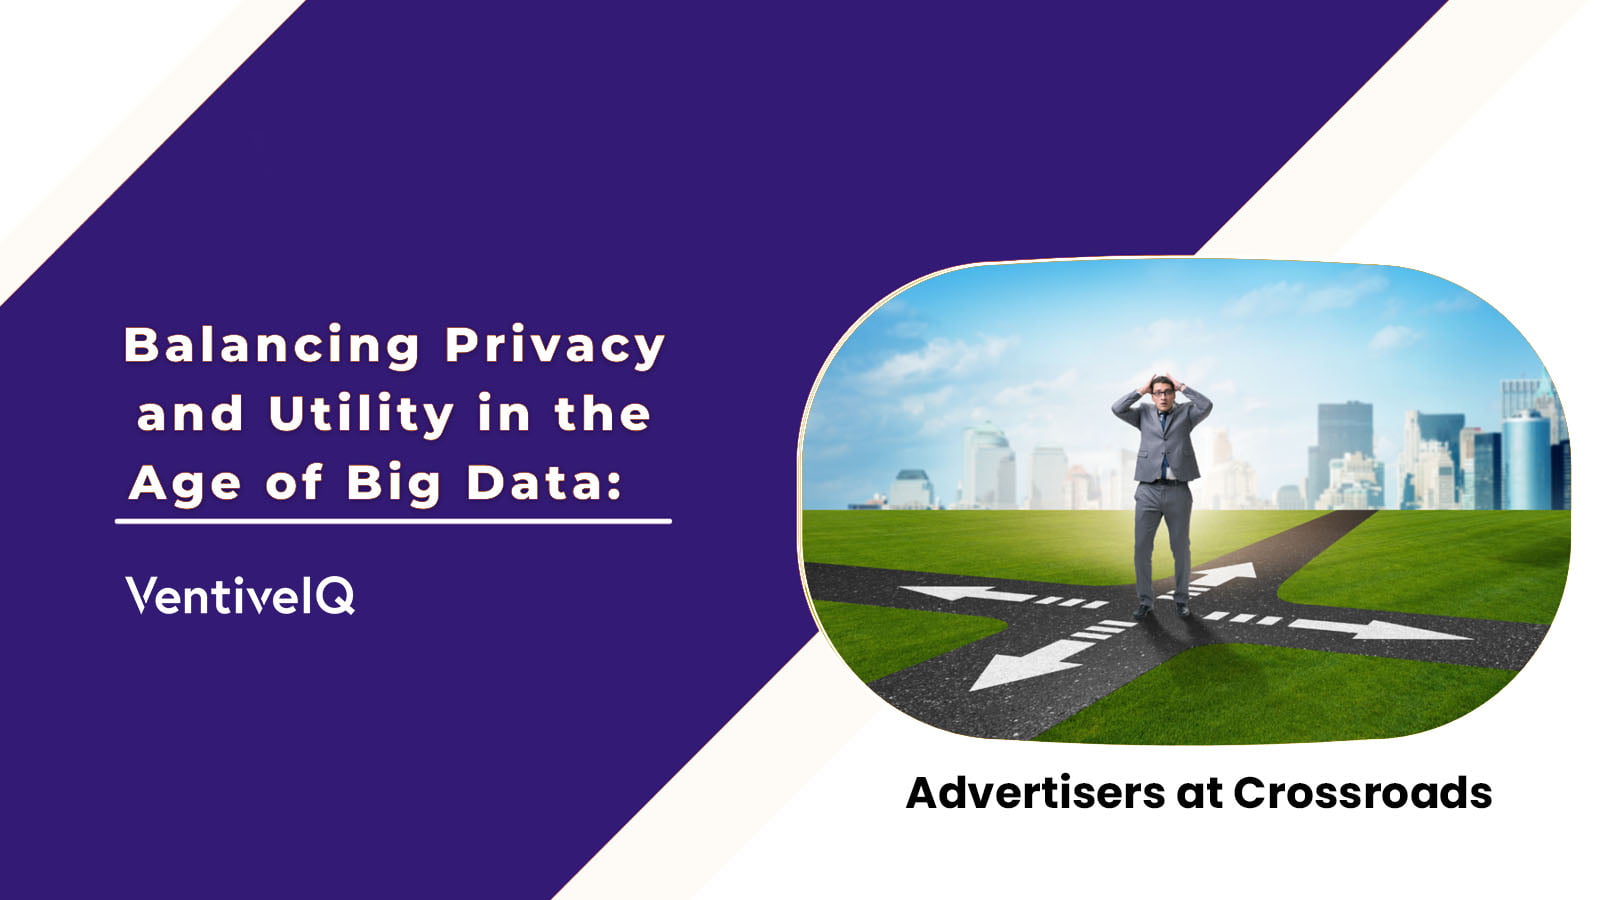 Balancing Privacy and Utility in the Age of Big Data: Advertisers at Crossroads